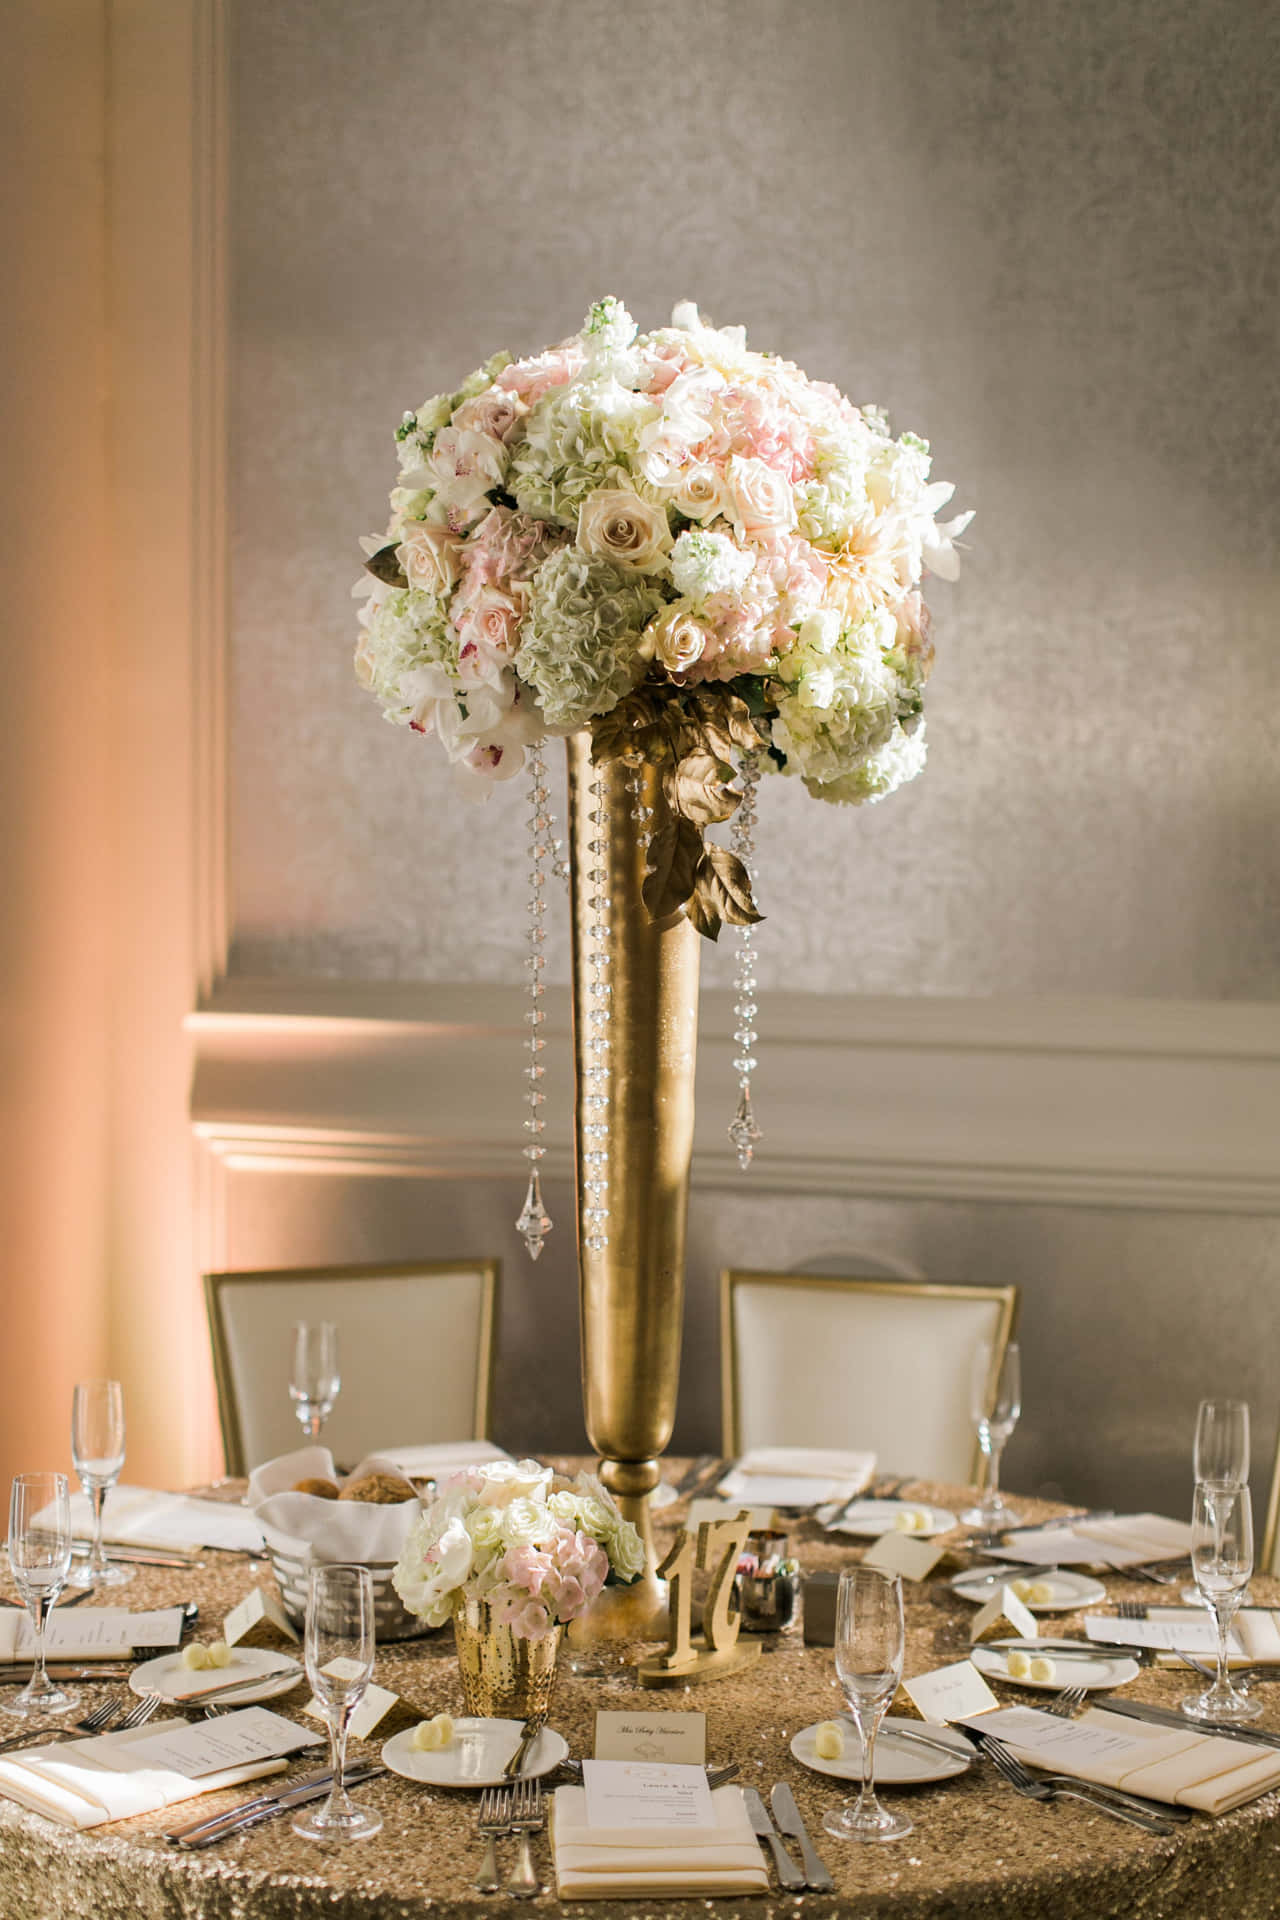 Breathtaking Floral Centerpiece with Glowing Candles" Wallpaper